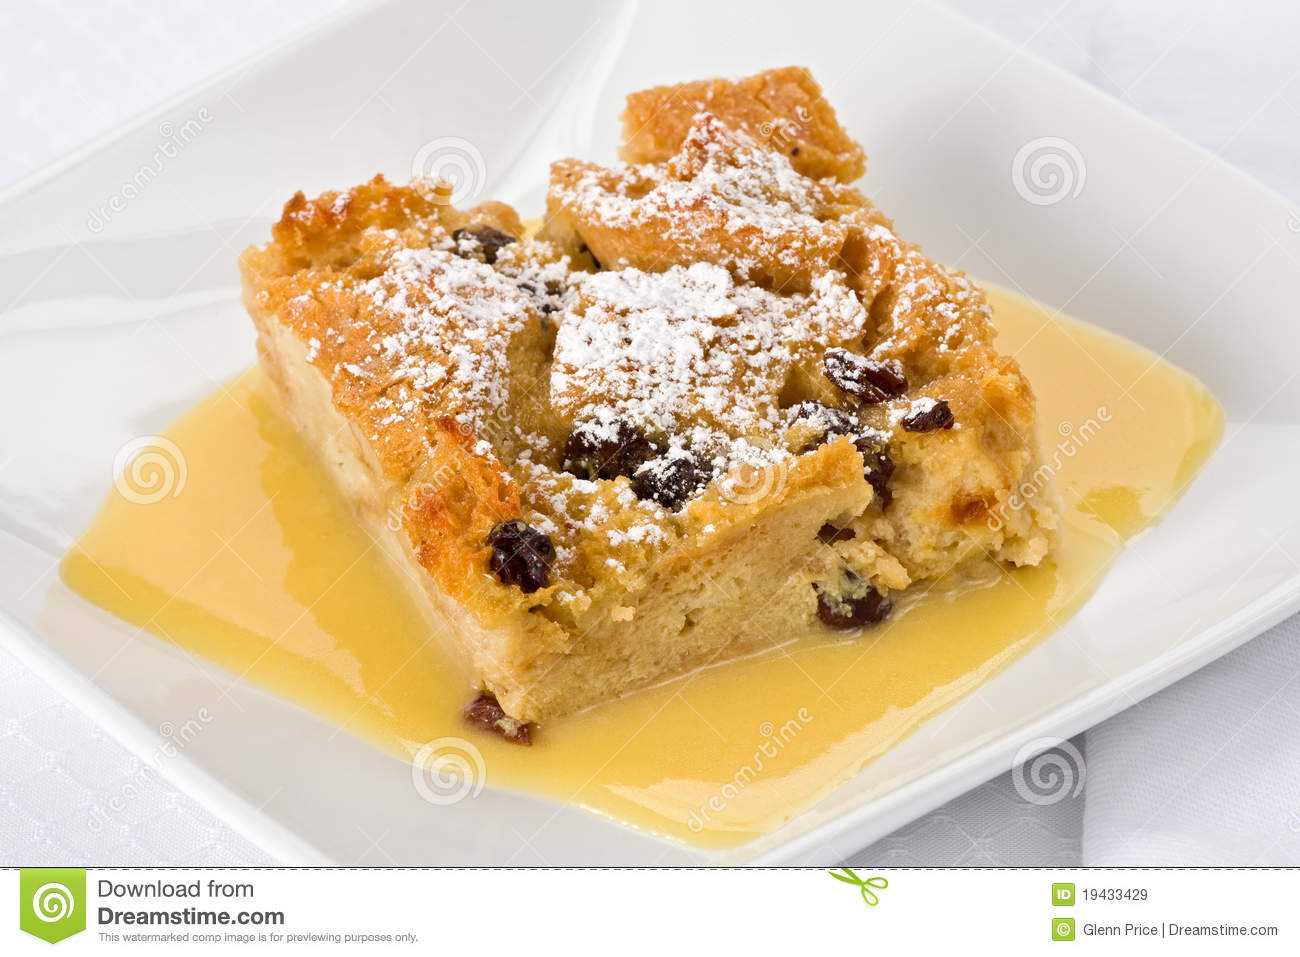 Bread Pudding Royalty Free Stock Images   Image  19433429